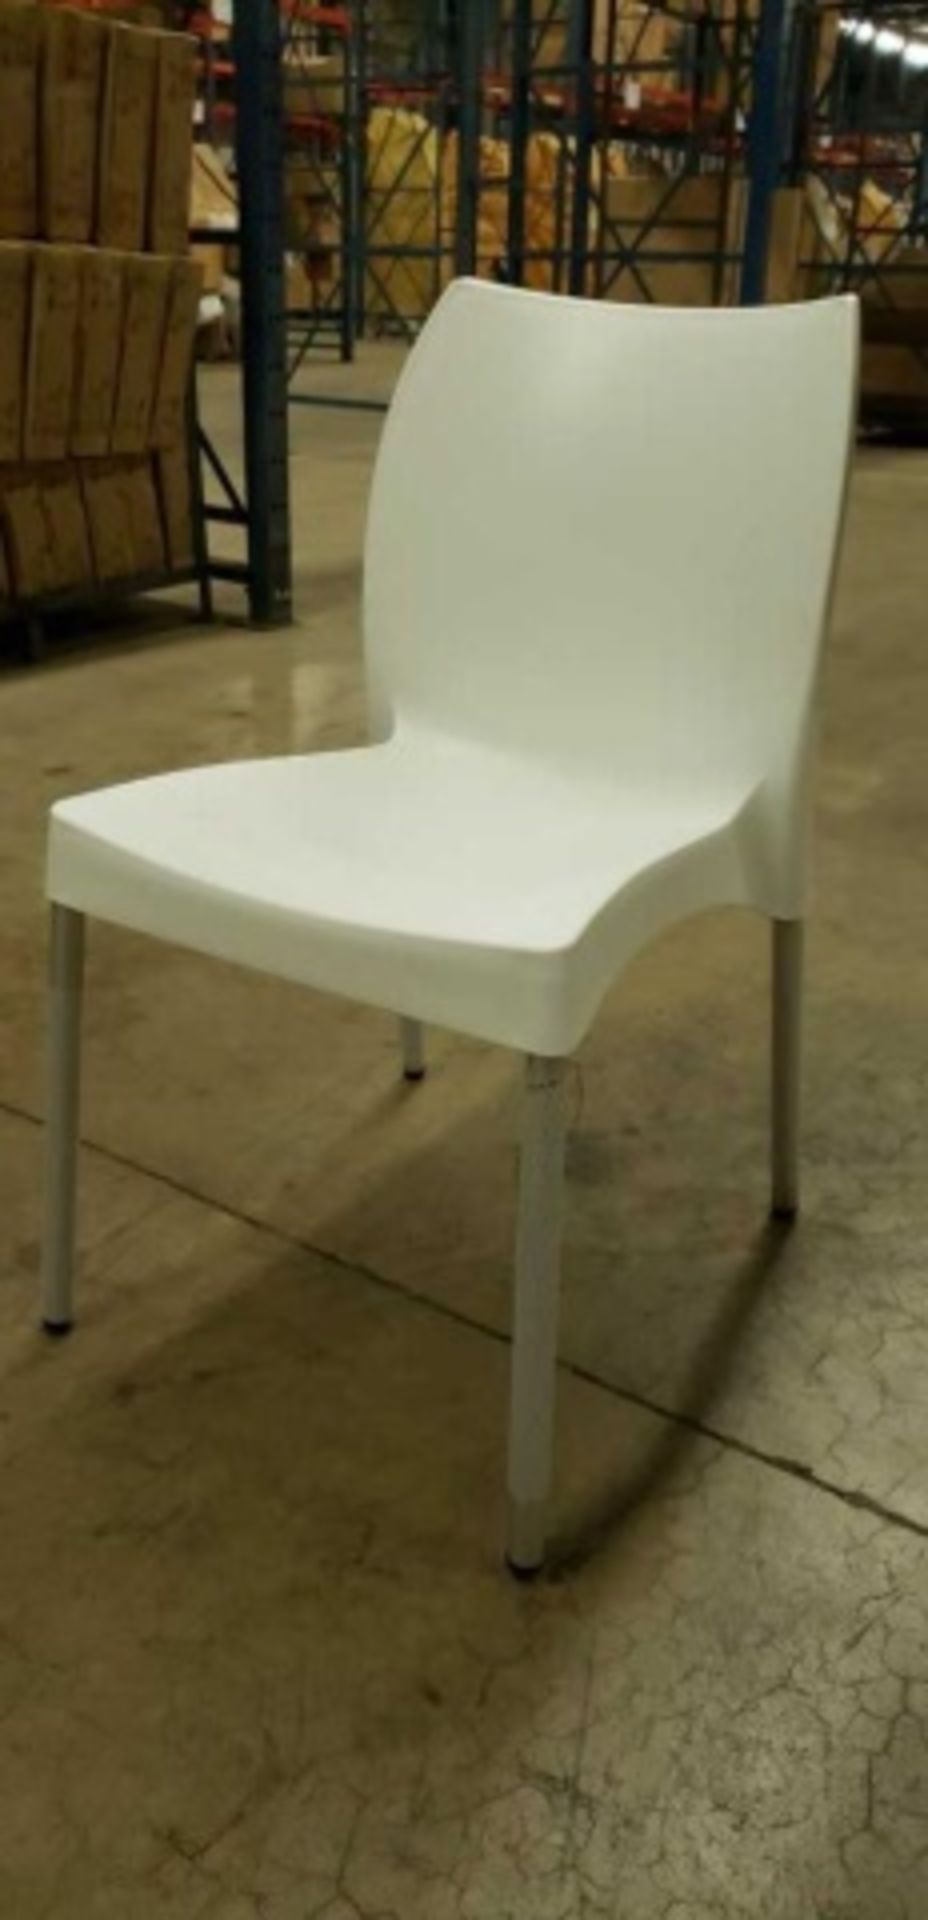 Domenica side chair - white, 2 boxes w/ 4 each, 8 total - Image 3 of 4